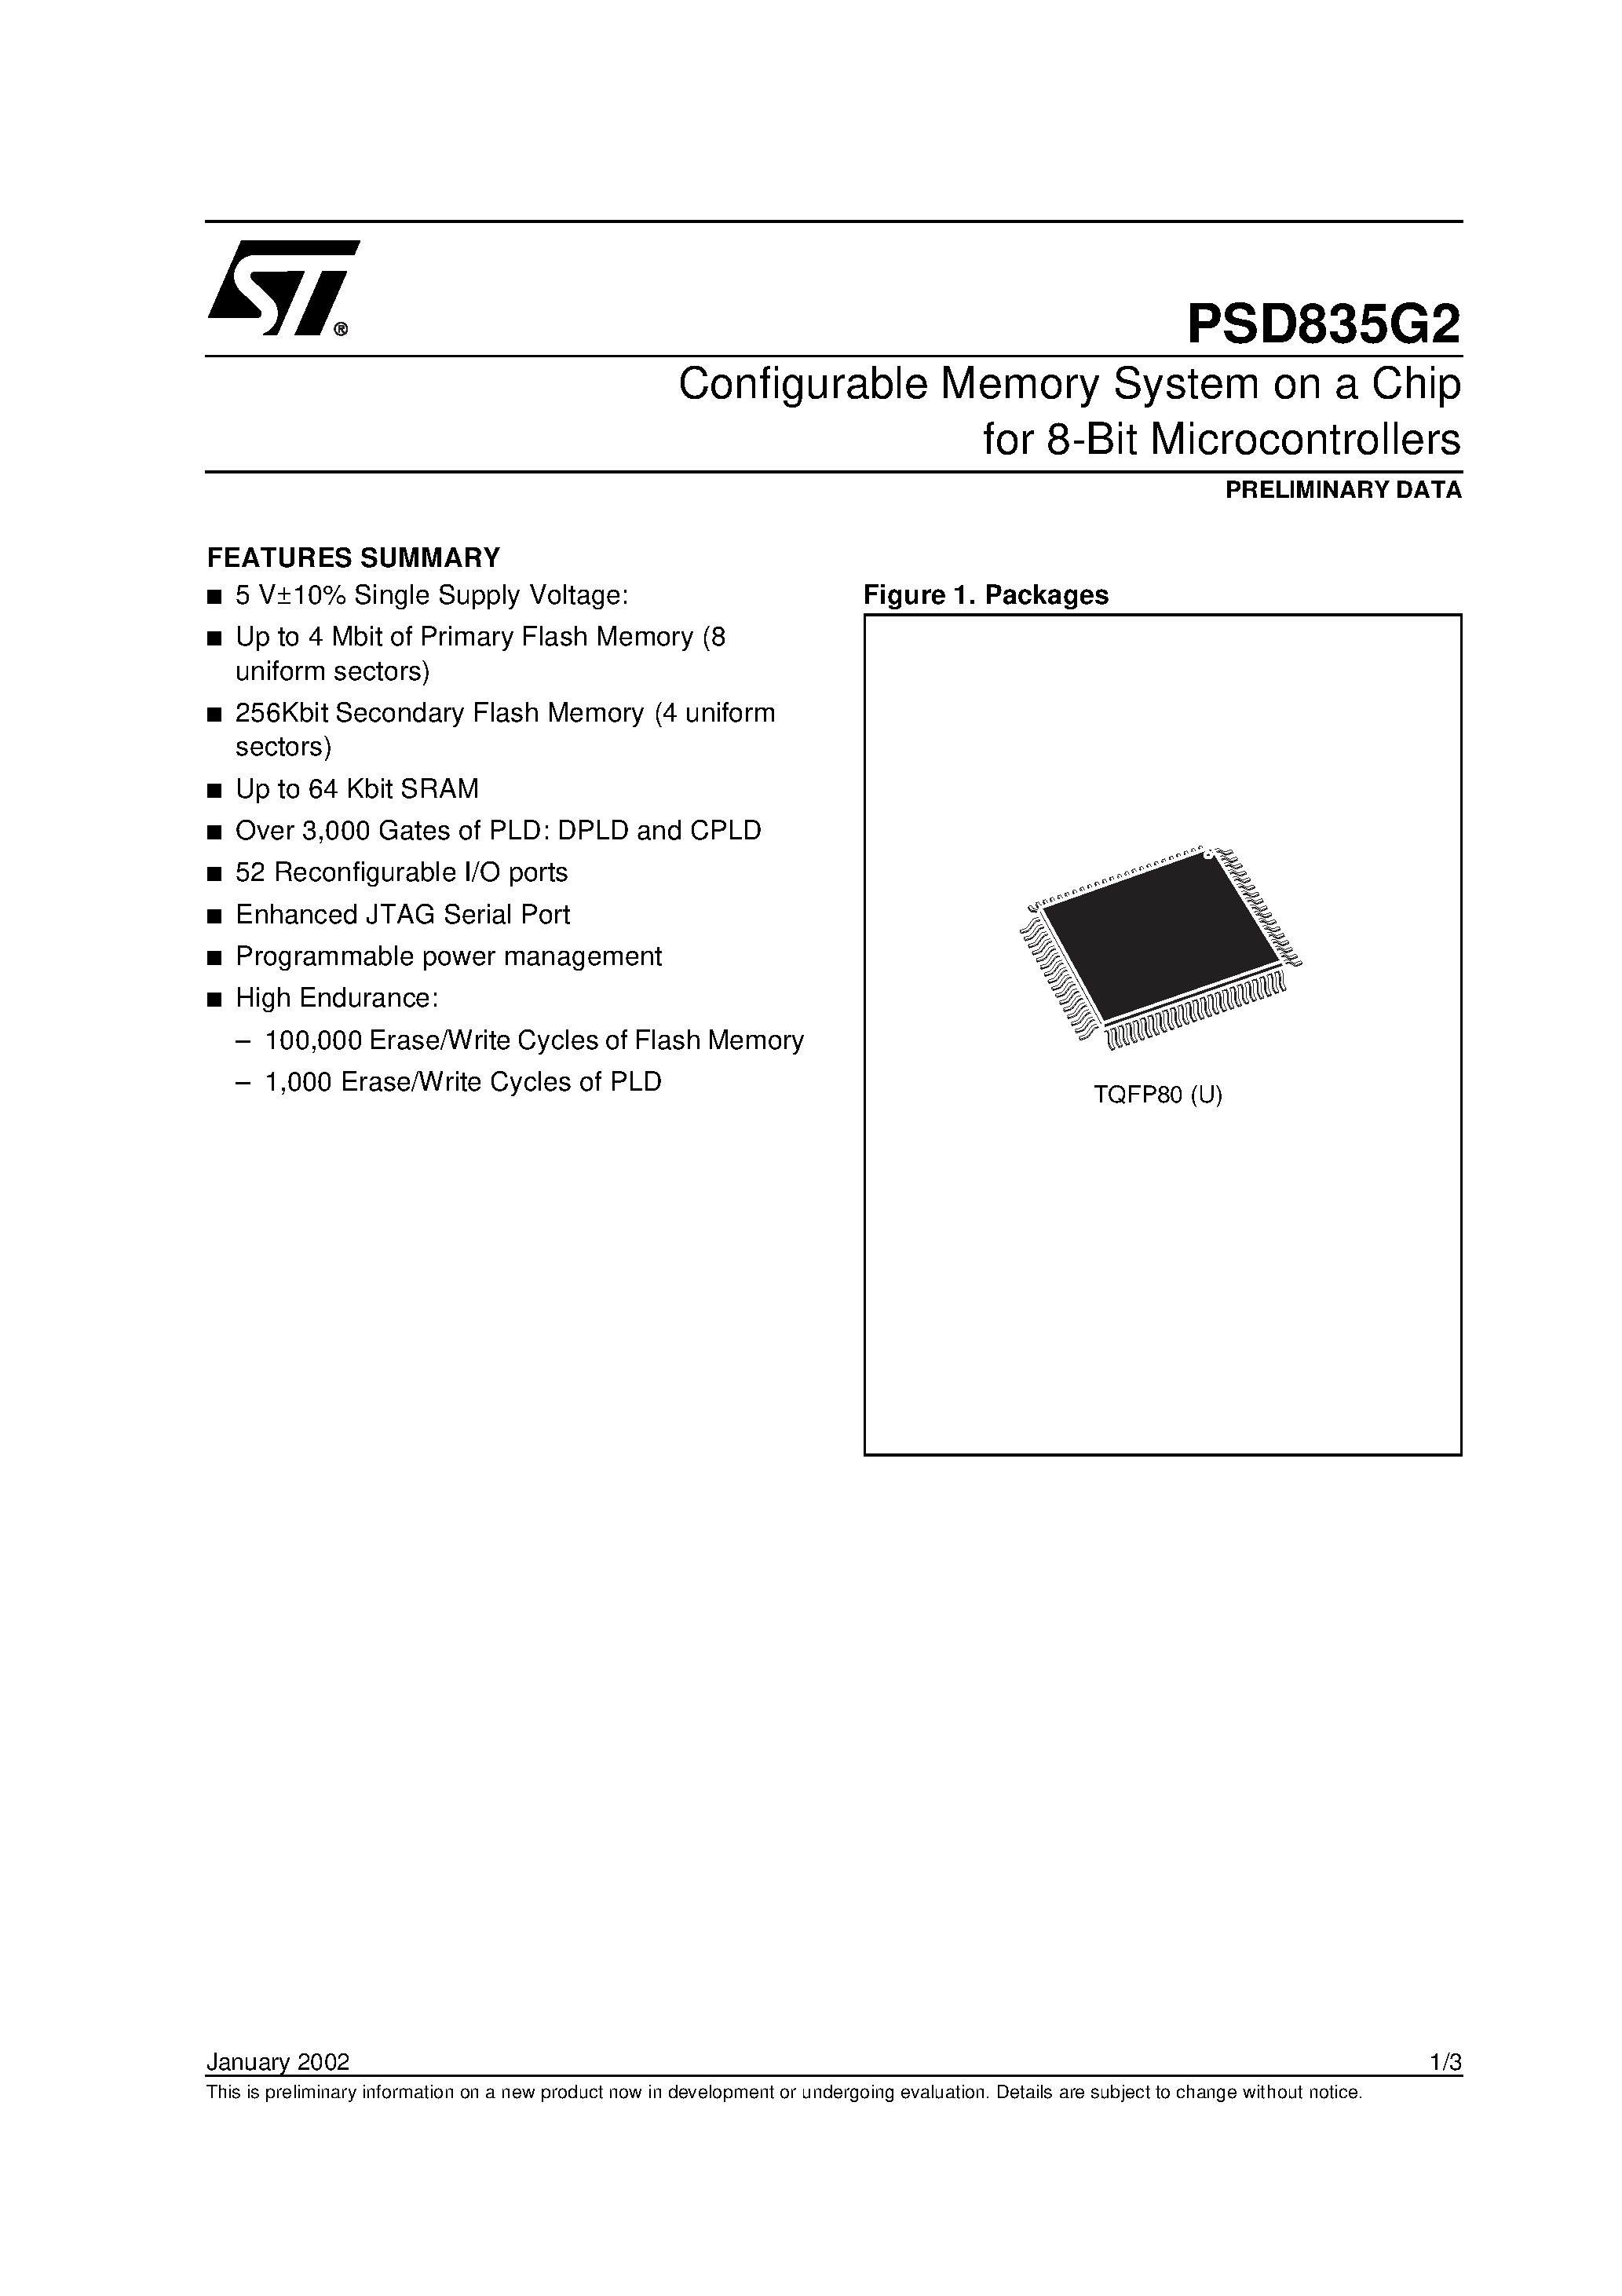 Datasheet PSD835F2V-A-20U - Configurable Memory System on a Chip for 8-Bit Microcontrollers page 1